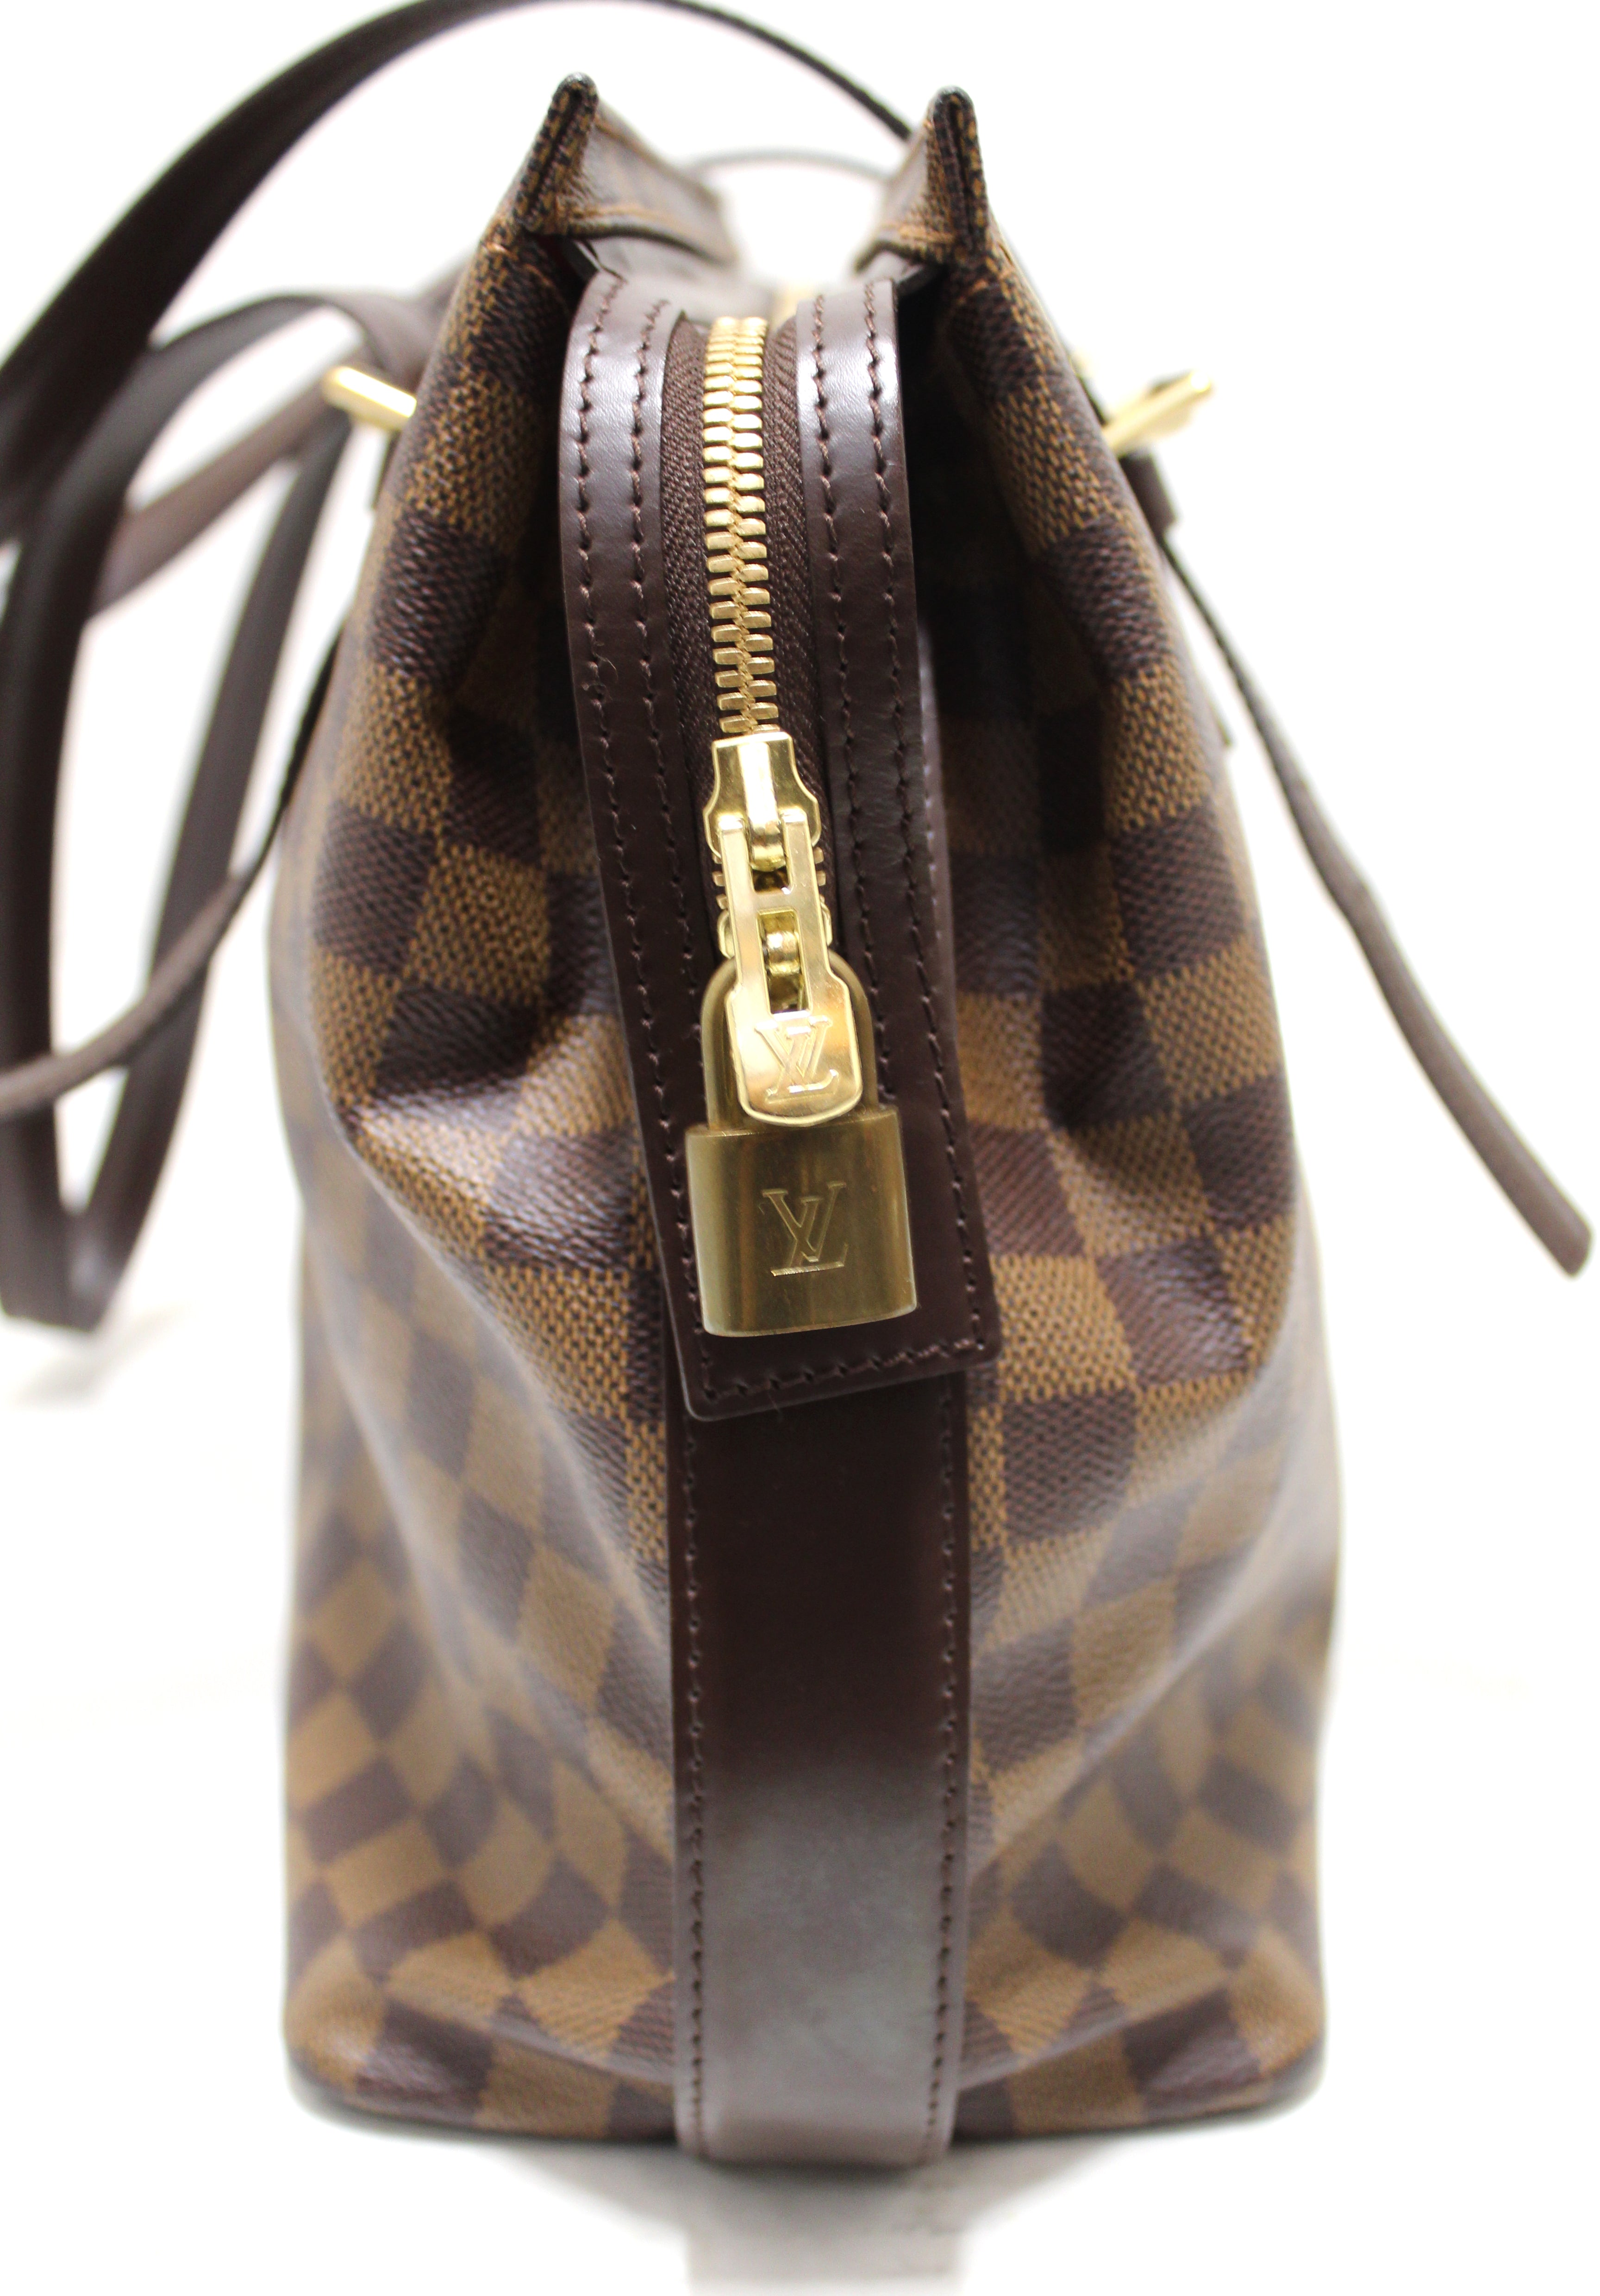 Louis Vuitton Chelsea Bag Tote In Damier Canvas With Box & Dustbag